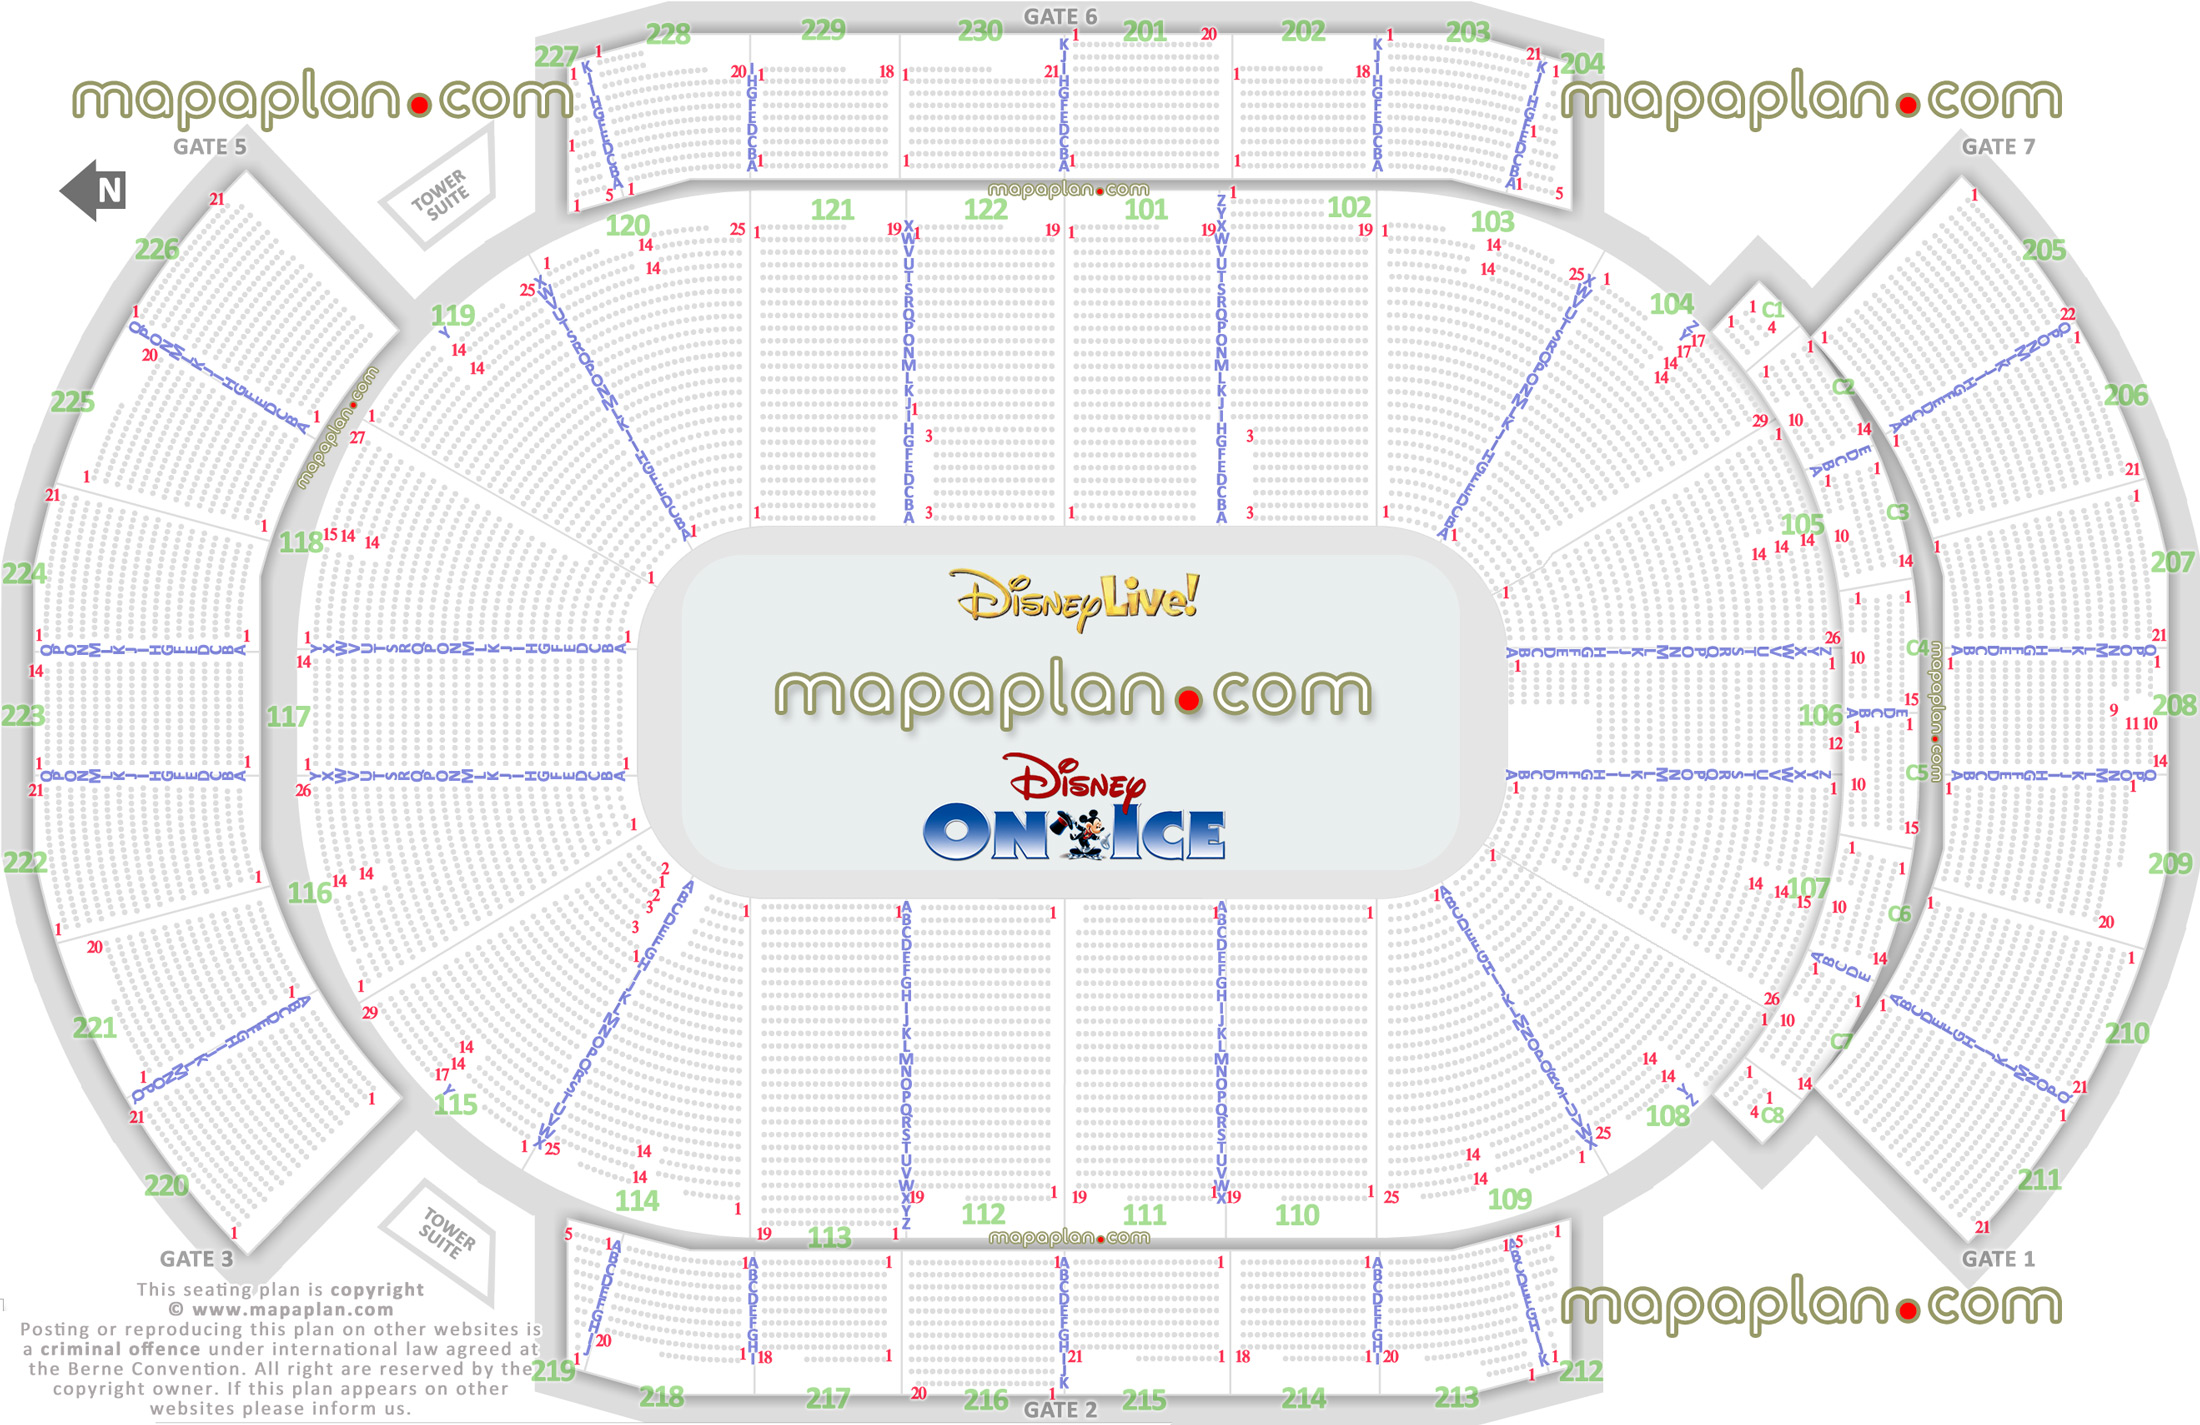 disney ice live glendale az usa best seat finder 3d interactive virtual tool precise detailed aisle seat loge box rows numbering location data plan ice rink event floor level map lower bowl concourse club upper balcony seating tower executive suites rows a b c d e f g h i j k l m n o p q r s t u v w x y z Glendale Gila River Arena seating chart